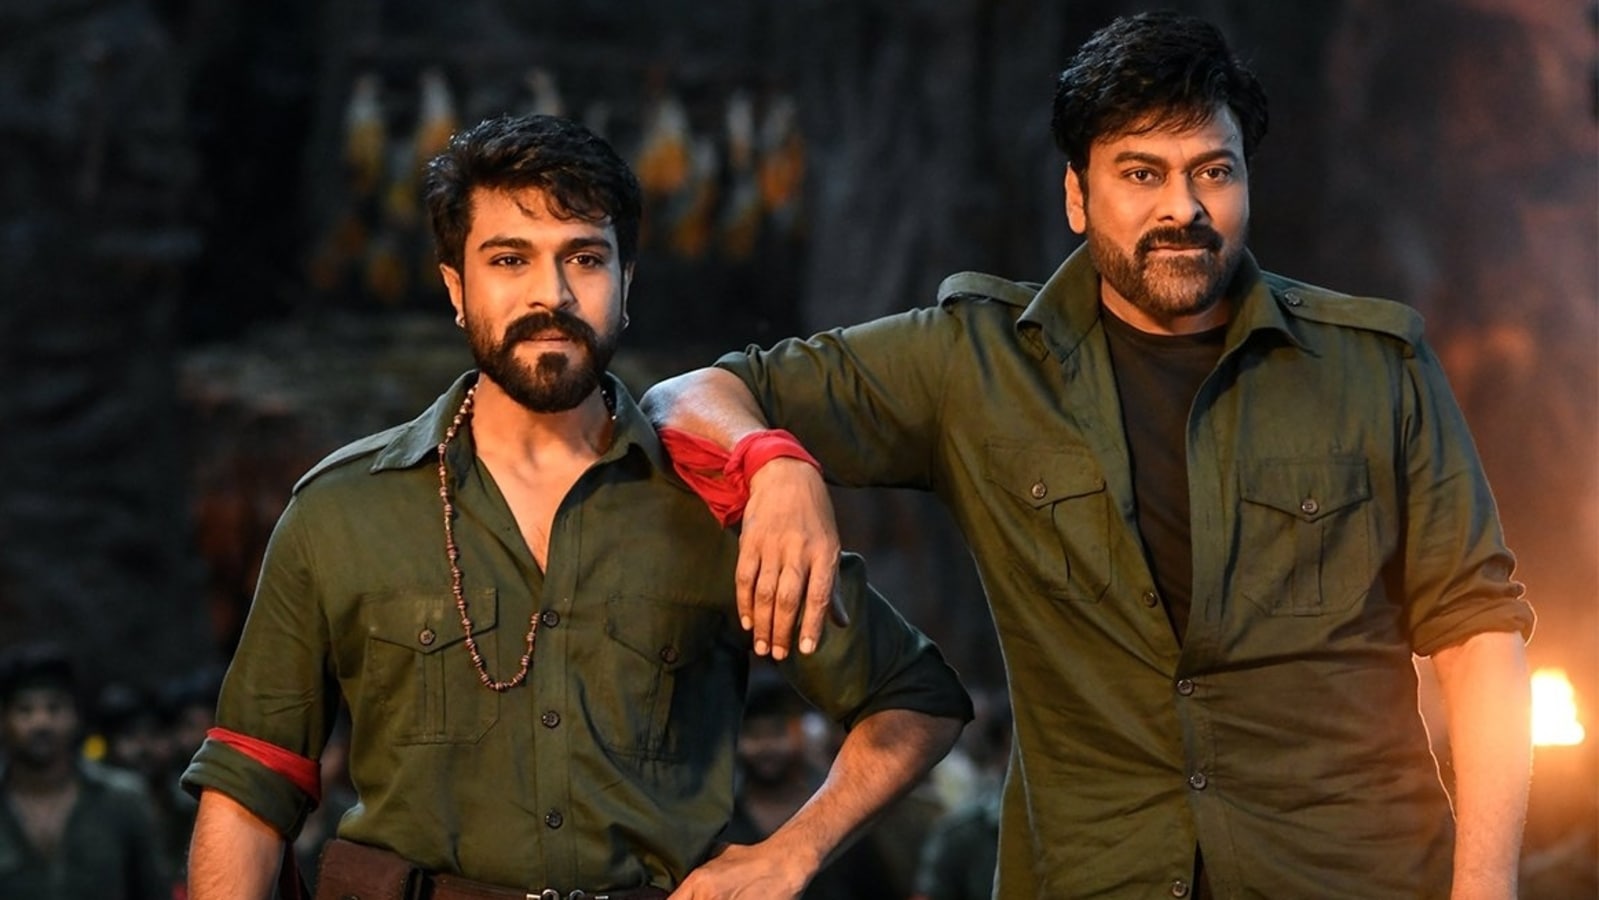 chiranjeevi-on-acharya-box-office-failure-ram-charan-and-i-returned-80-percent-of-remuneration-have-no-guilt